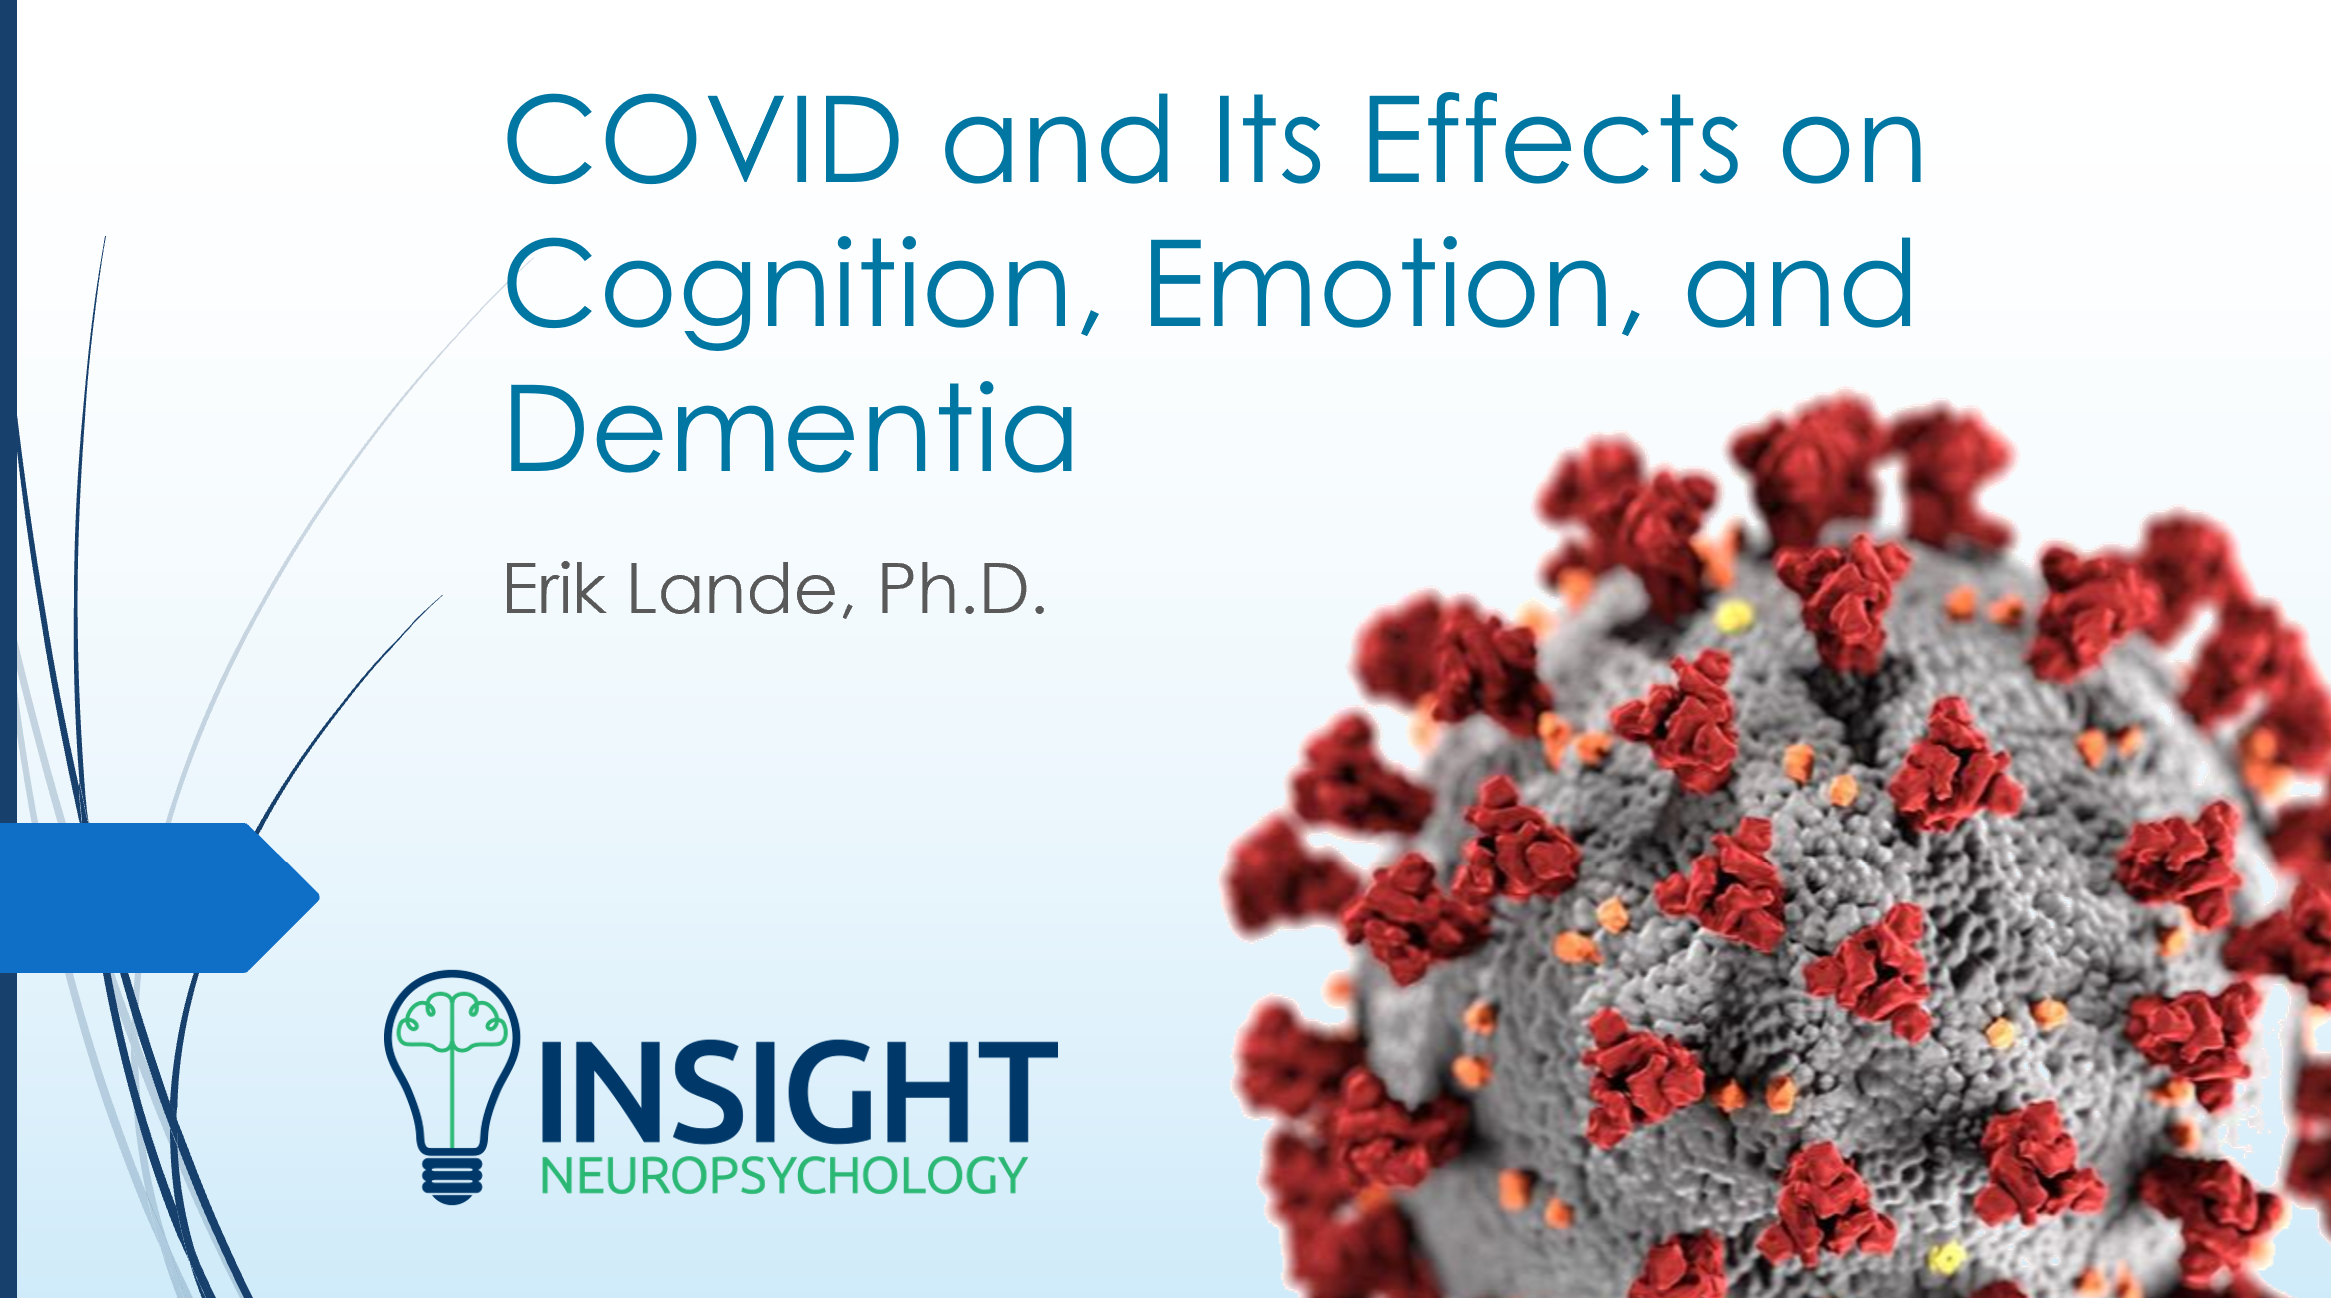 COVID and Its Effects on Cognition, Emotion, and Dementia